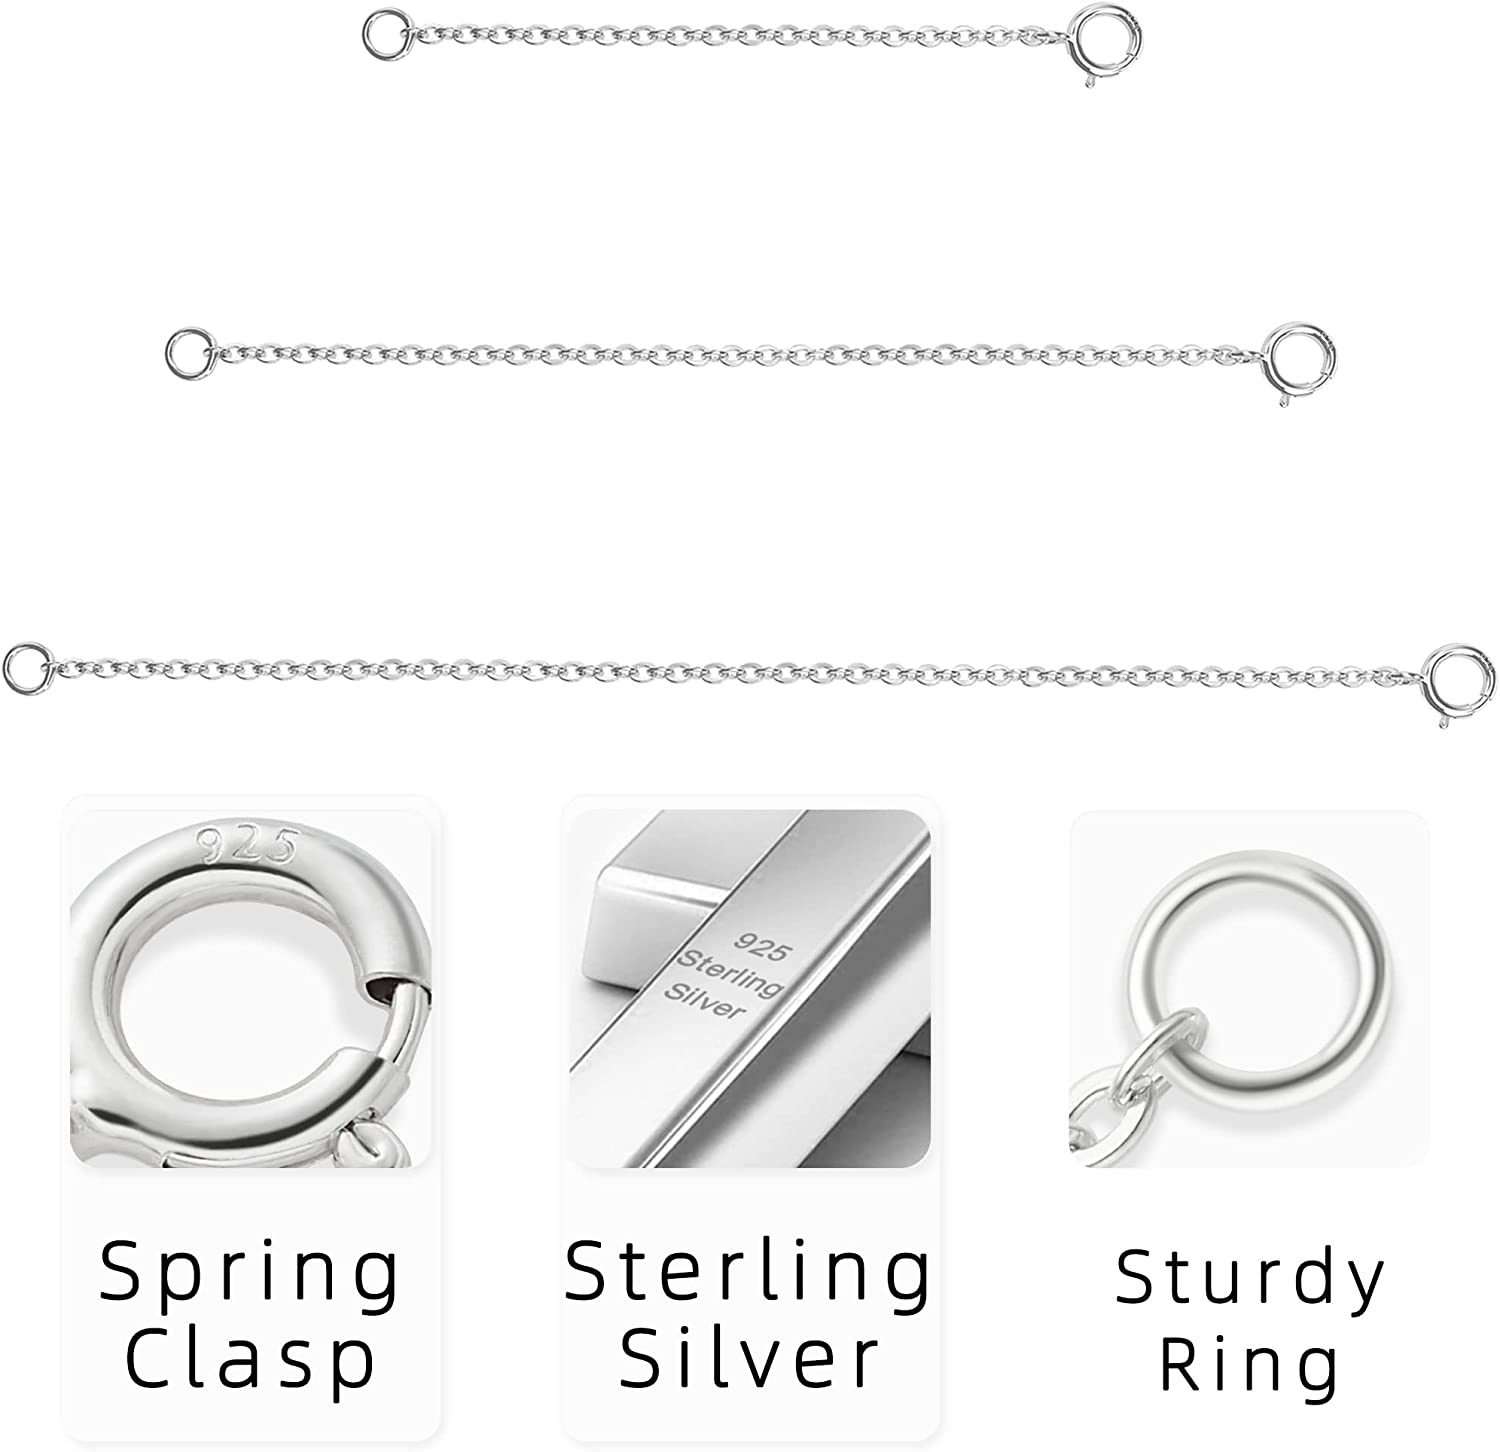 925 Sterling Silver Necklace Extender Sterling Silver Necklace Chain Extenders for Necklaces 2 inch, 3 inch, 4 inch Inches, Women's, Size: One Size